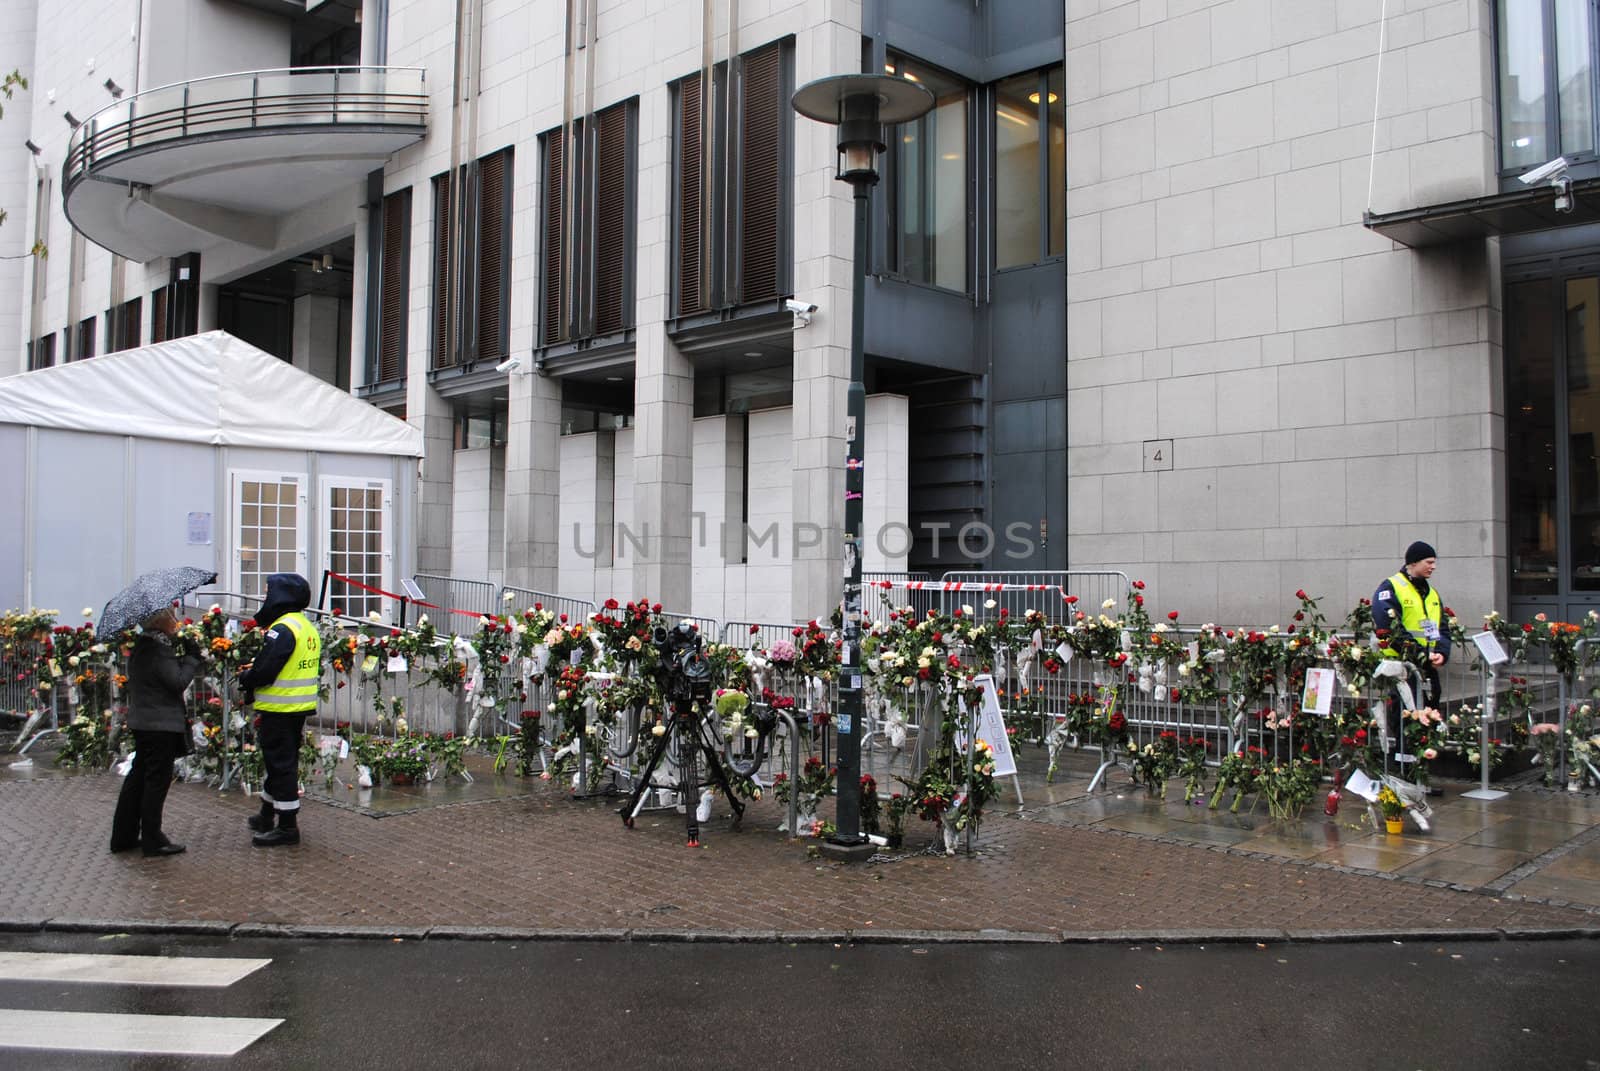 Flowers at the entrance of Oslo courthouse during the trial against terrorist Anders Behring Breivik.